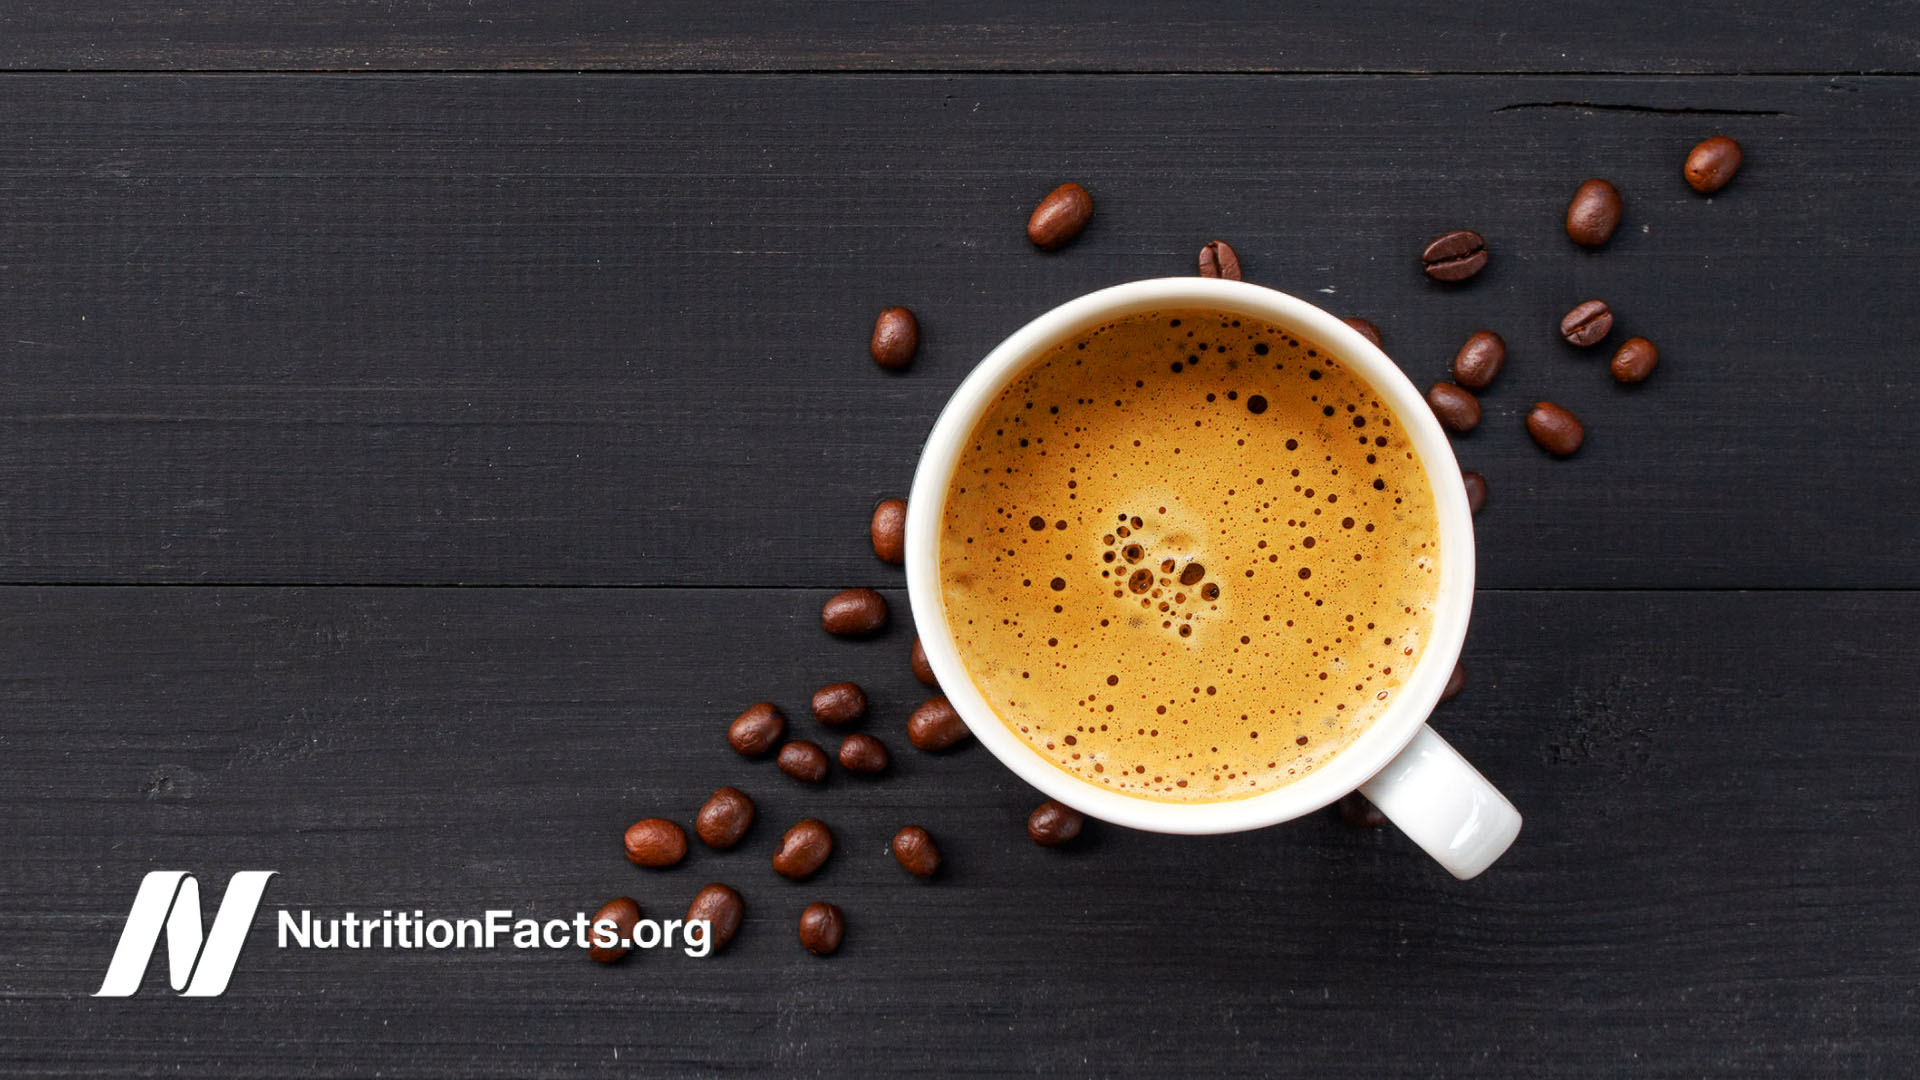 Does Coffee Truly Enhance Edible Potency or is It merely a Placebo?